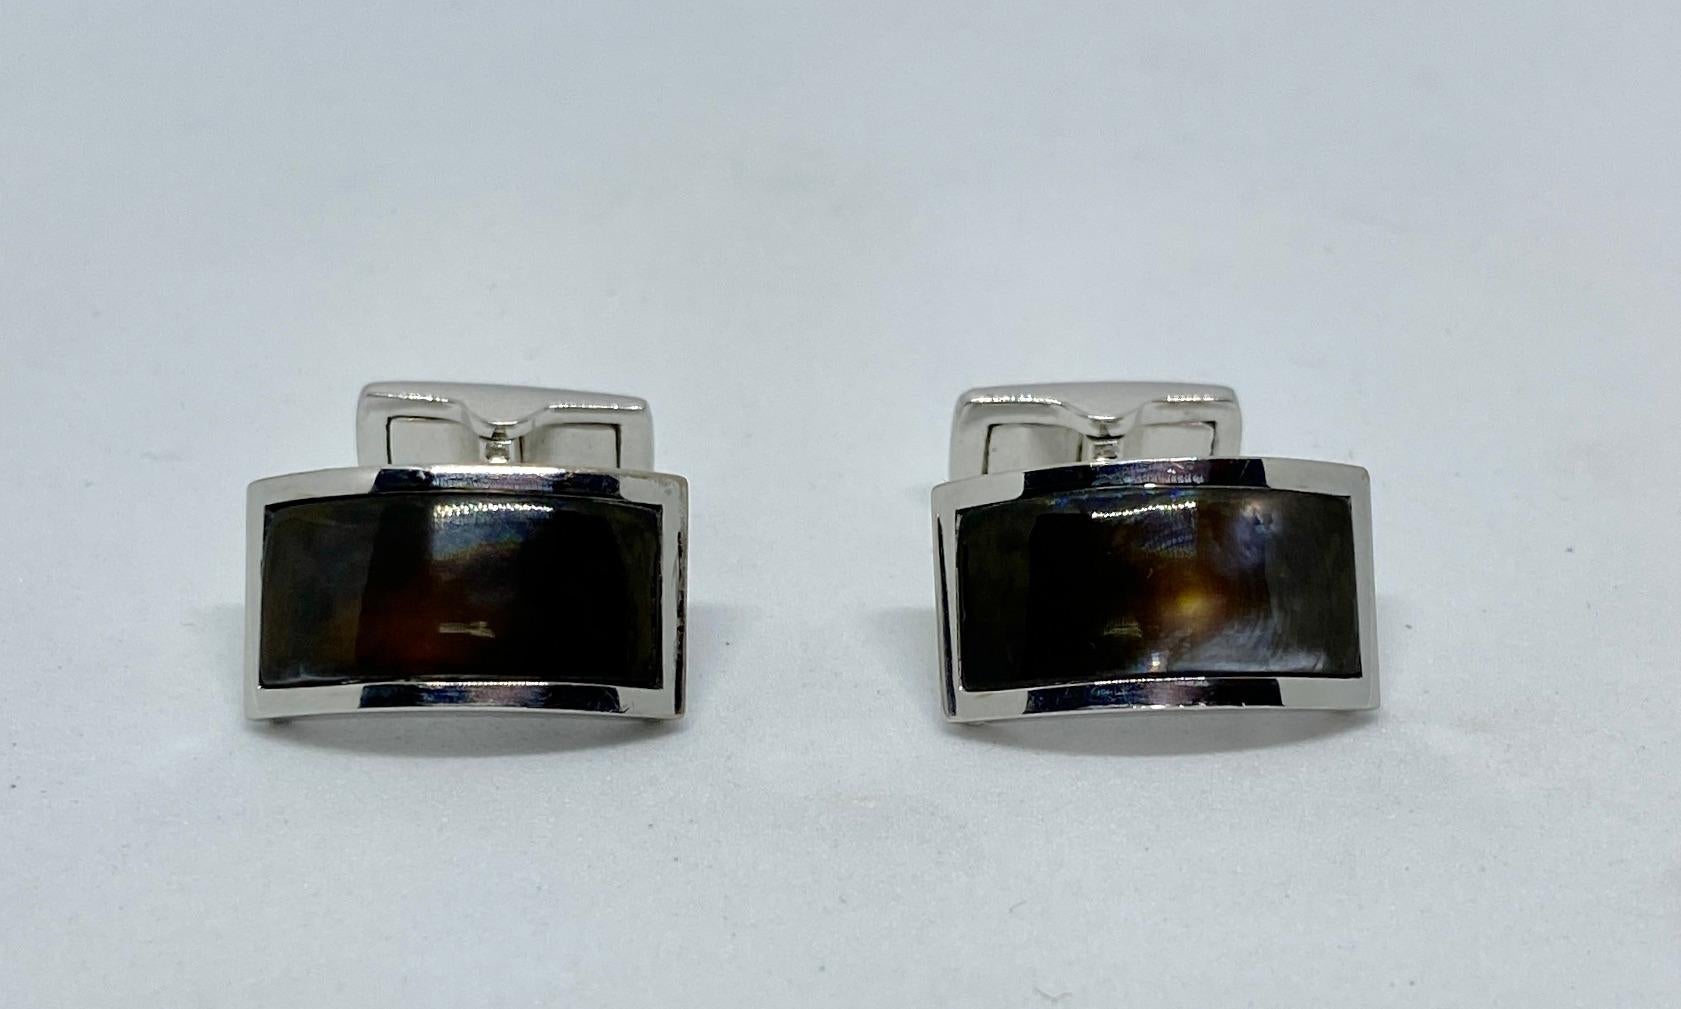 Exceptionally handsome and beautifully made cufflinks by the renowned Swiss jeweler, Gübelin. They're rendered in solid 18K white gold, these rare cufflinks are inset with dark, richly colored abalone.

The rectangular faces are curved; the toggle